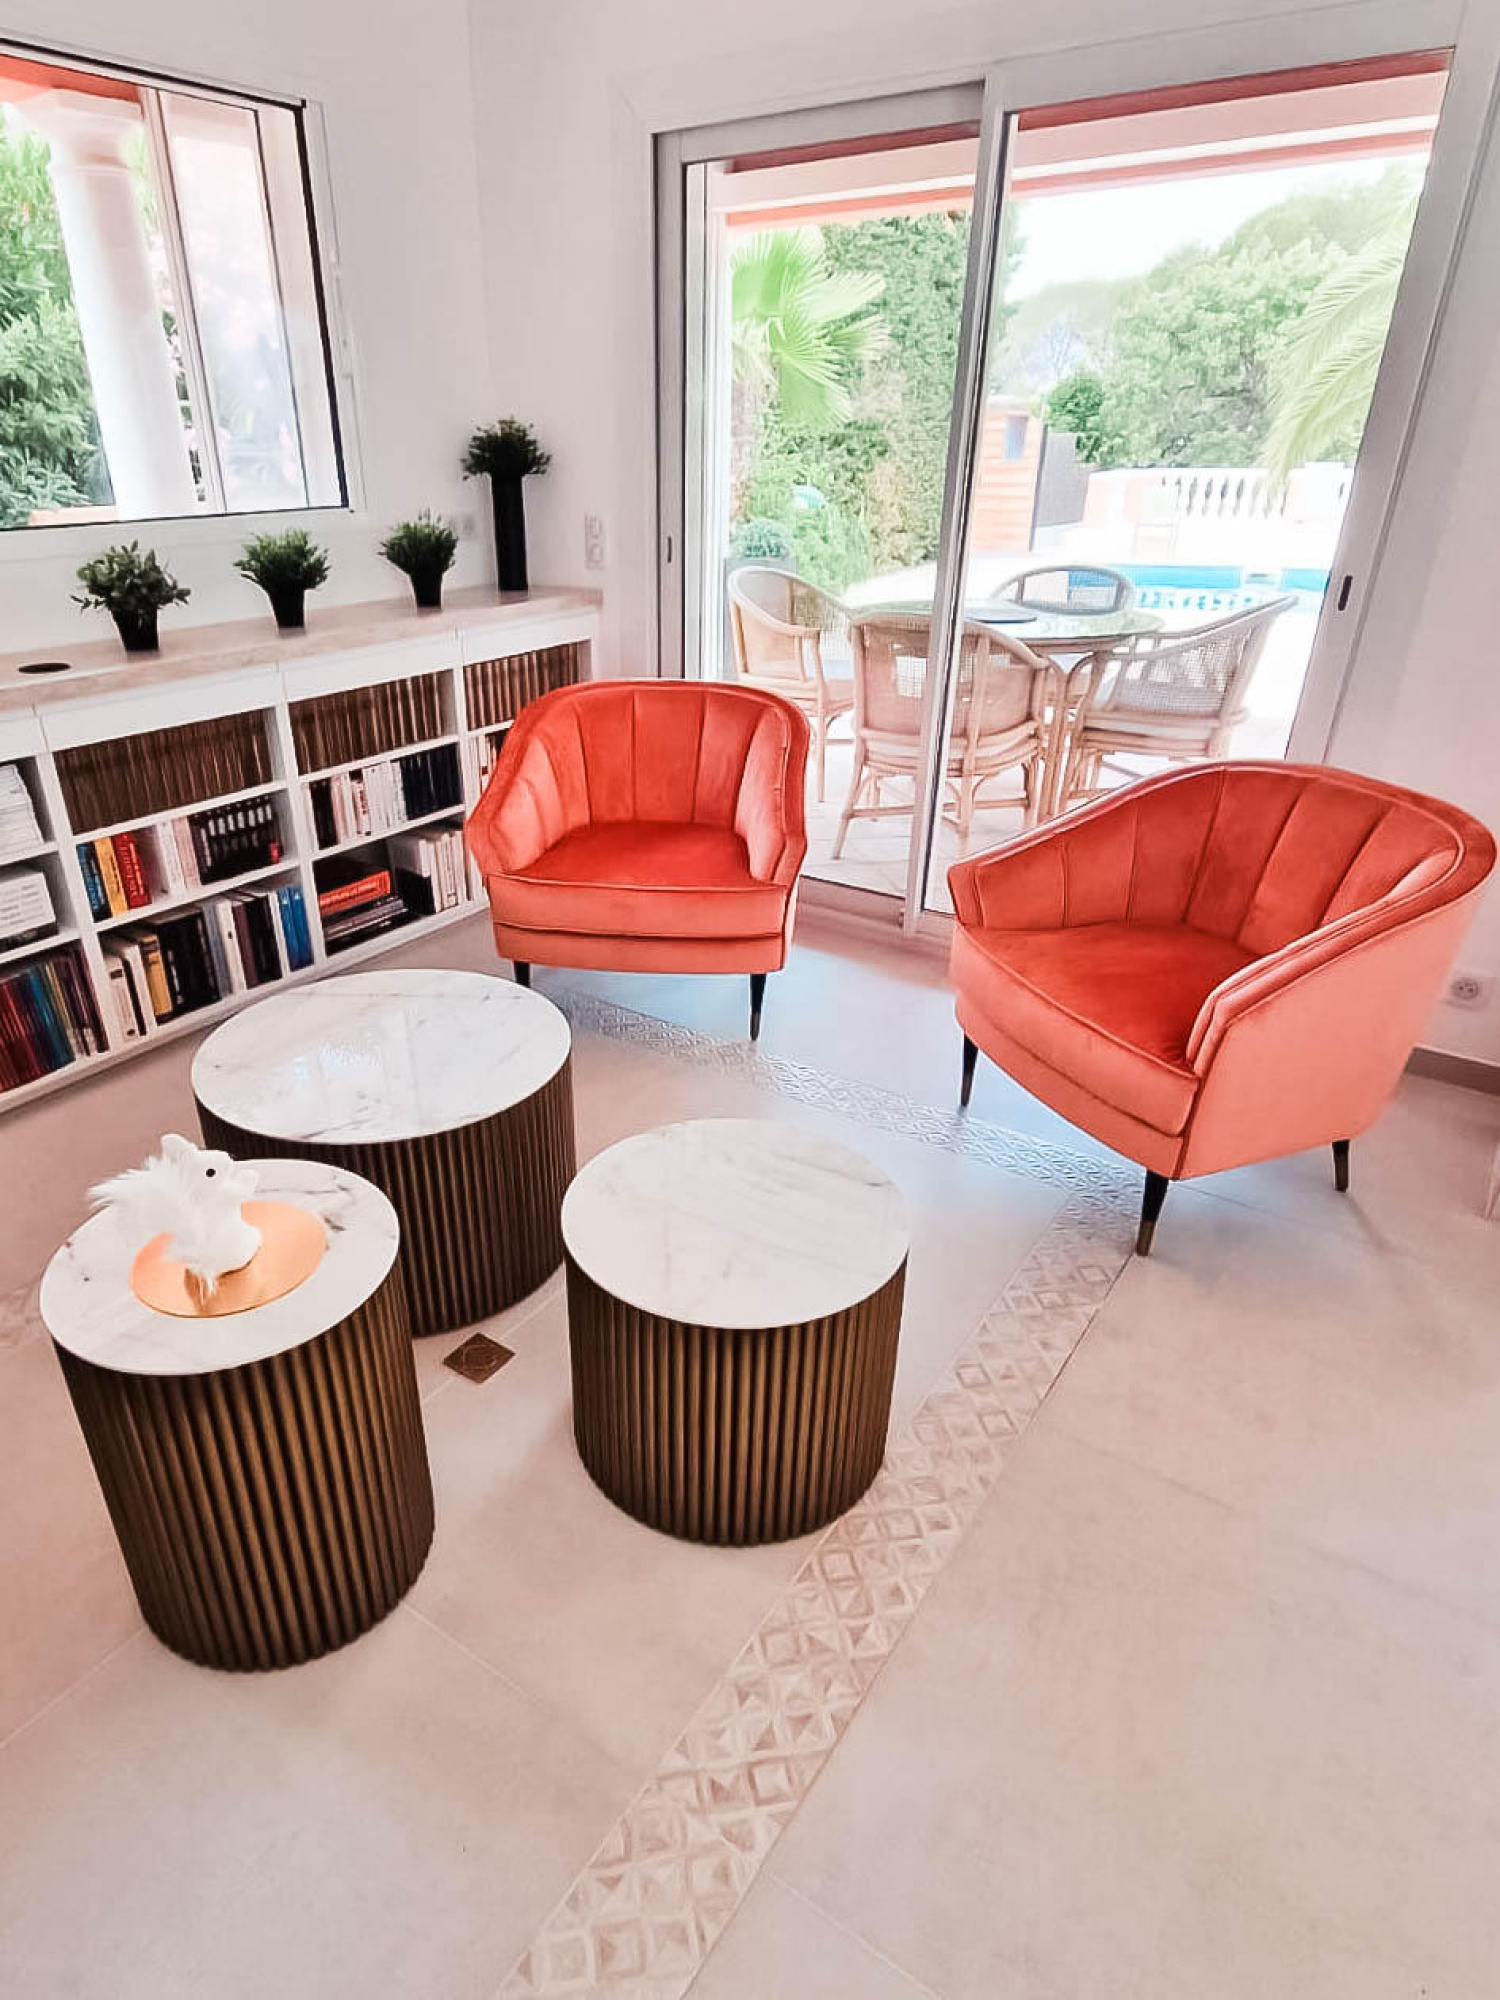 APARTMENT IN THE FRENCH RIVIERA - IBFOR - Your design shop